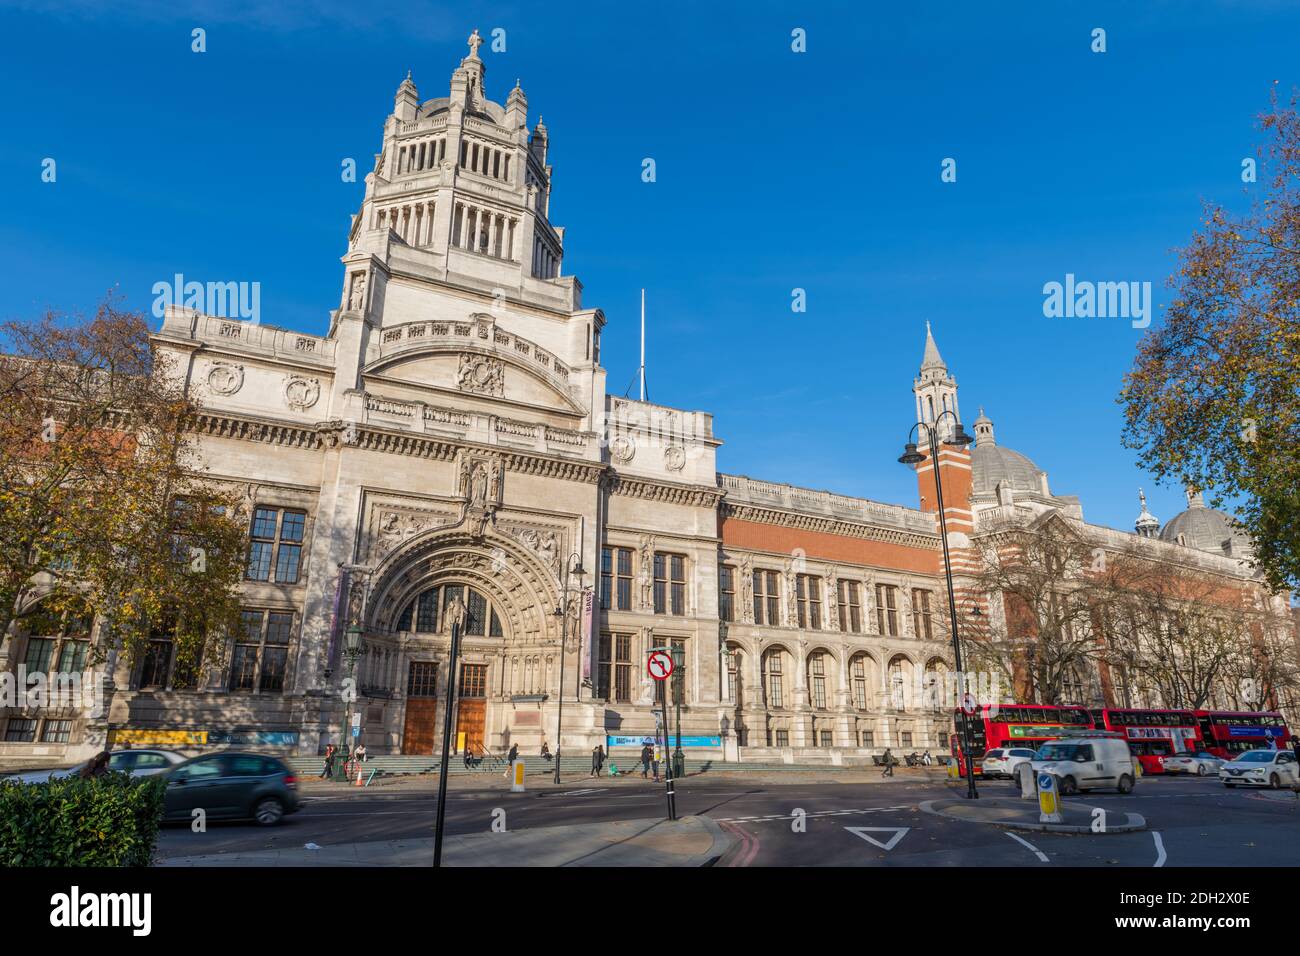 A street view of the Victoria and Albert Museum in South Kensington, Knightsbridge. Stock Photo